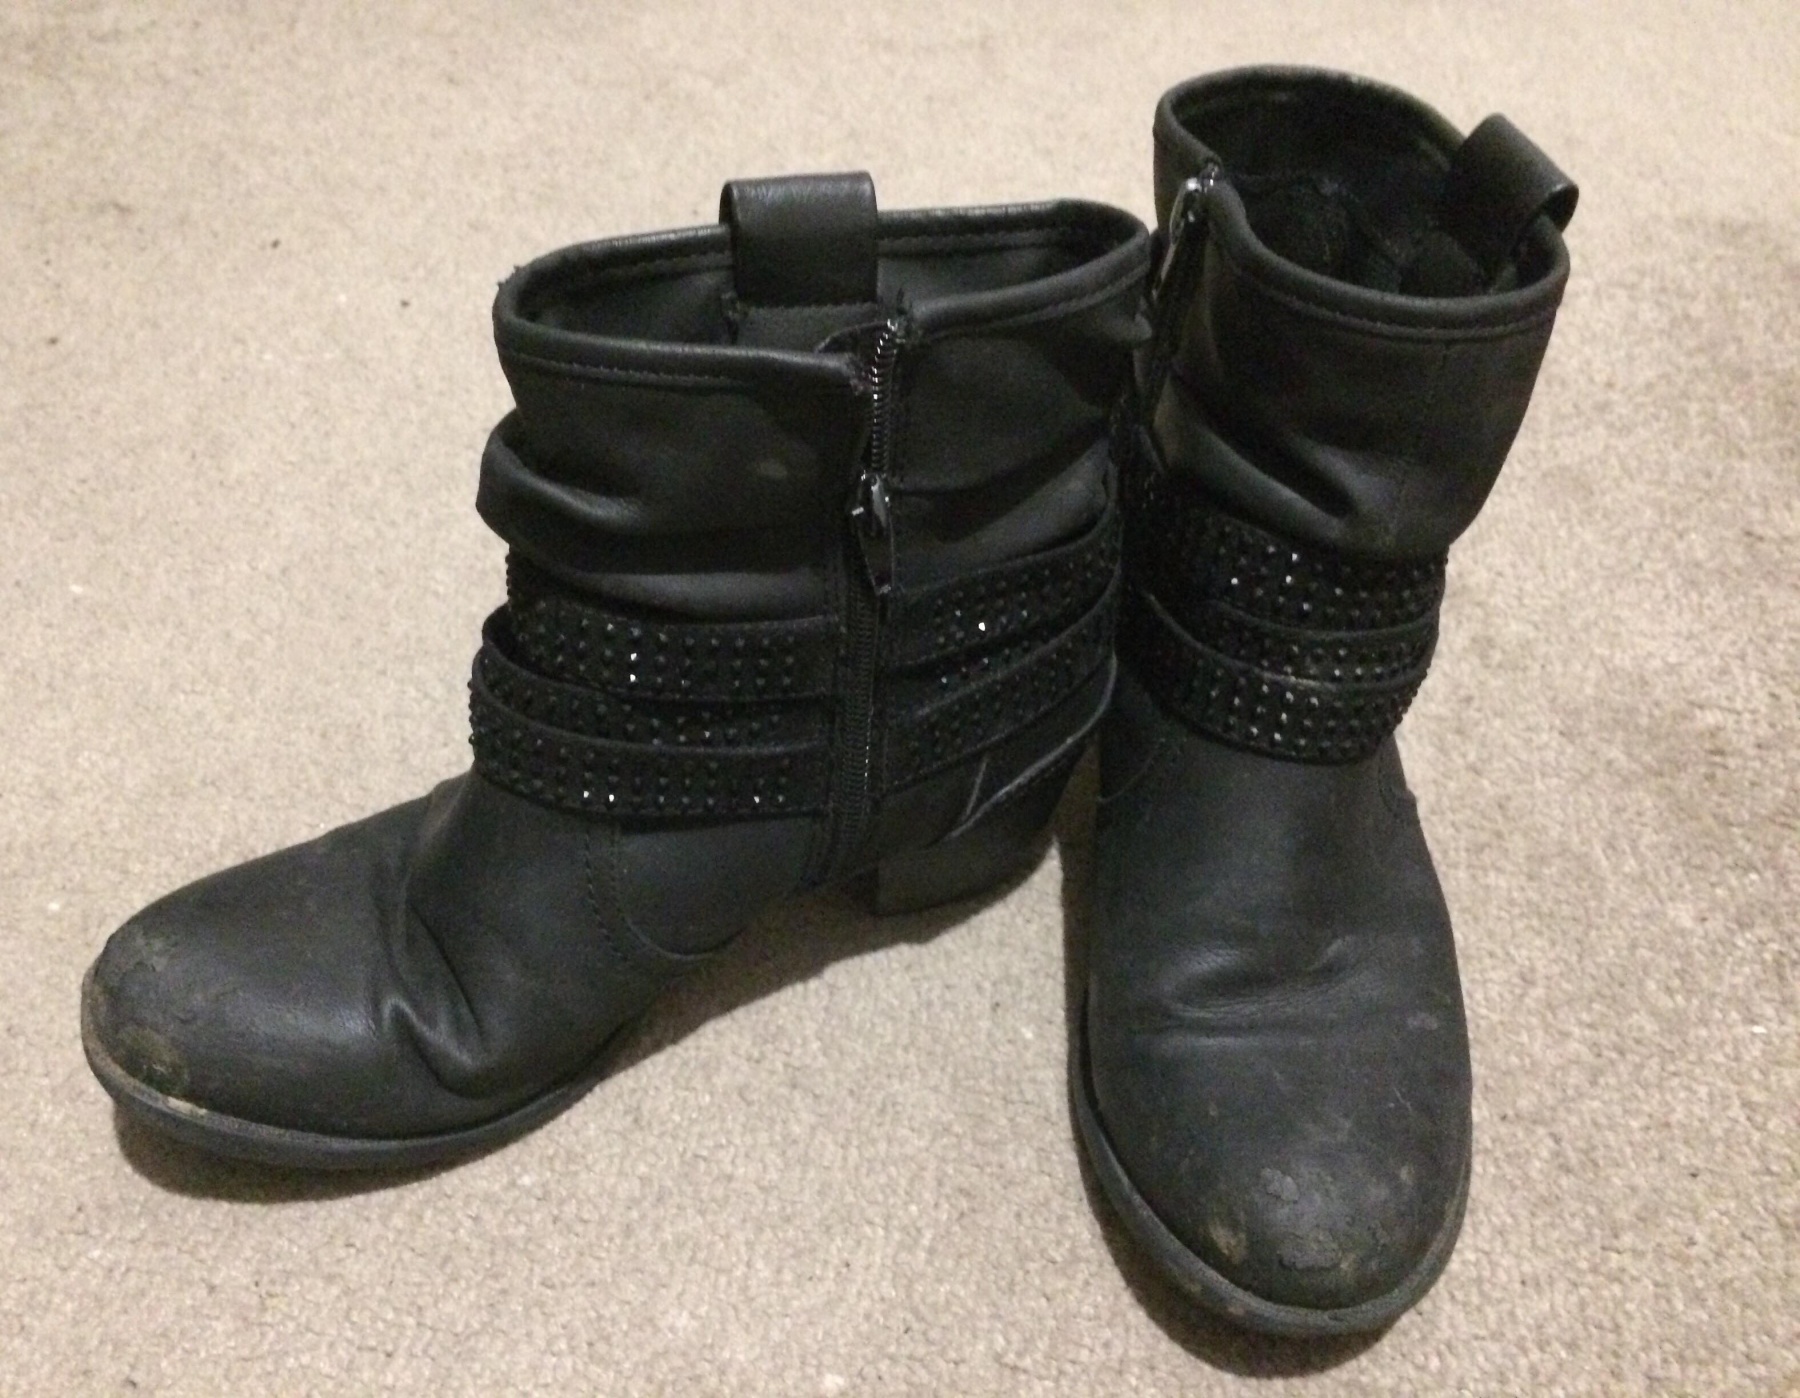 Heavily used Smelly boots